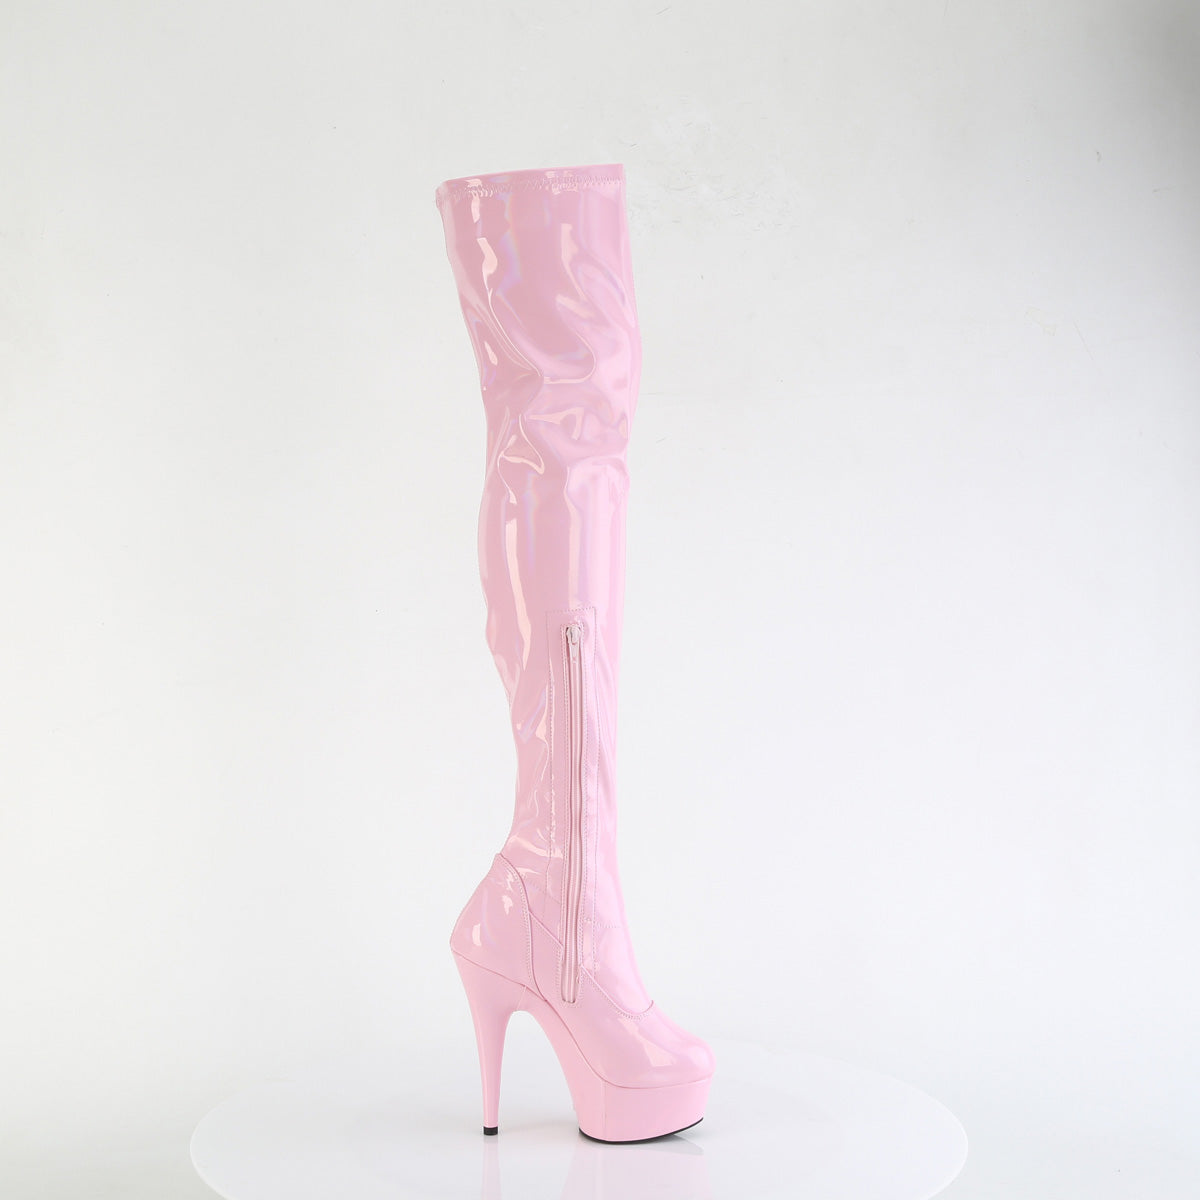 6 Inch Heel DELIGHT-3000HWR Baby Pink Holo Patent